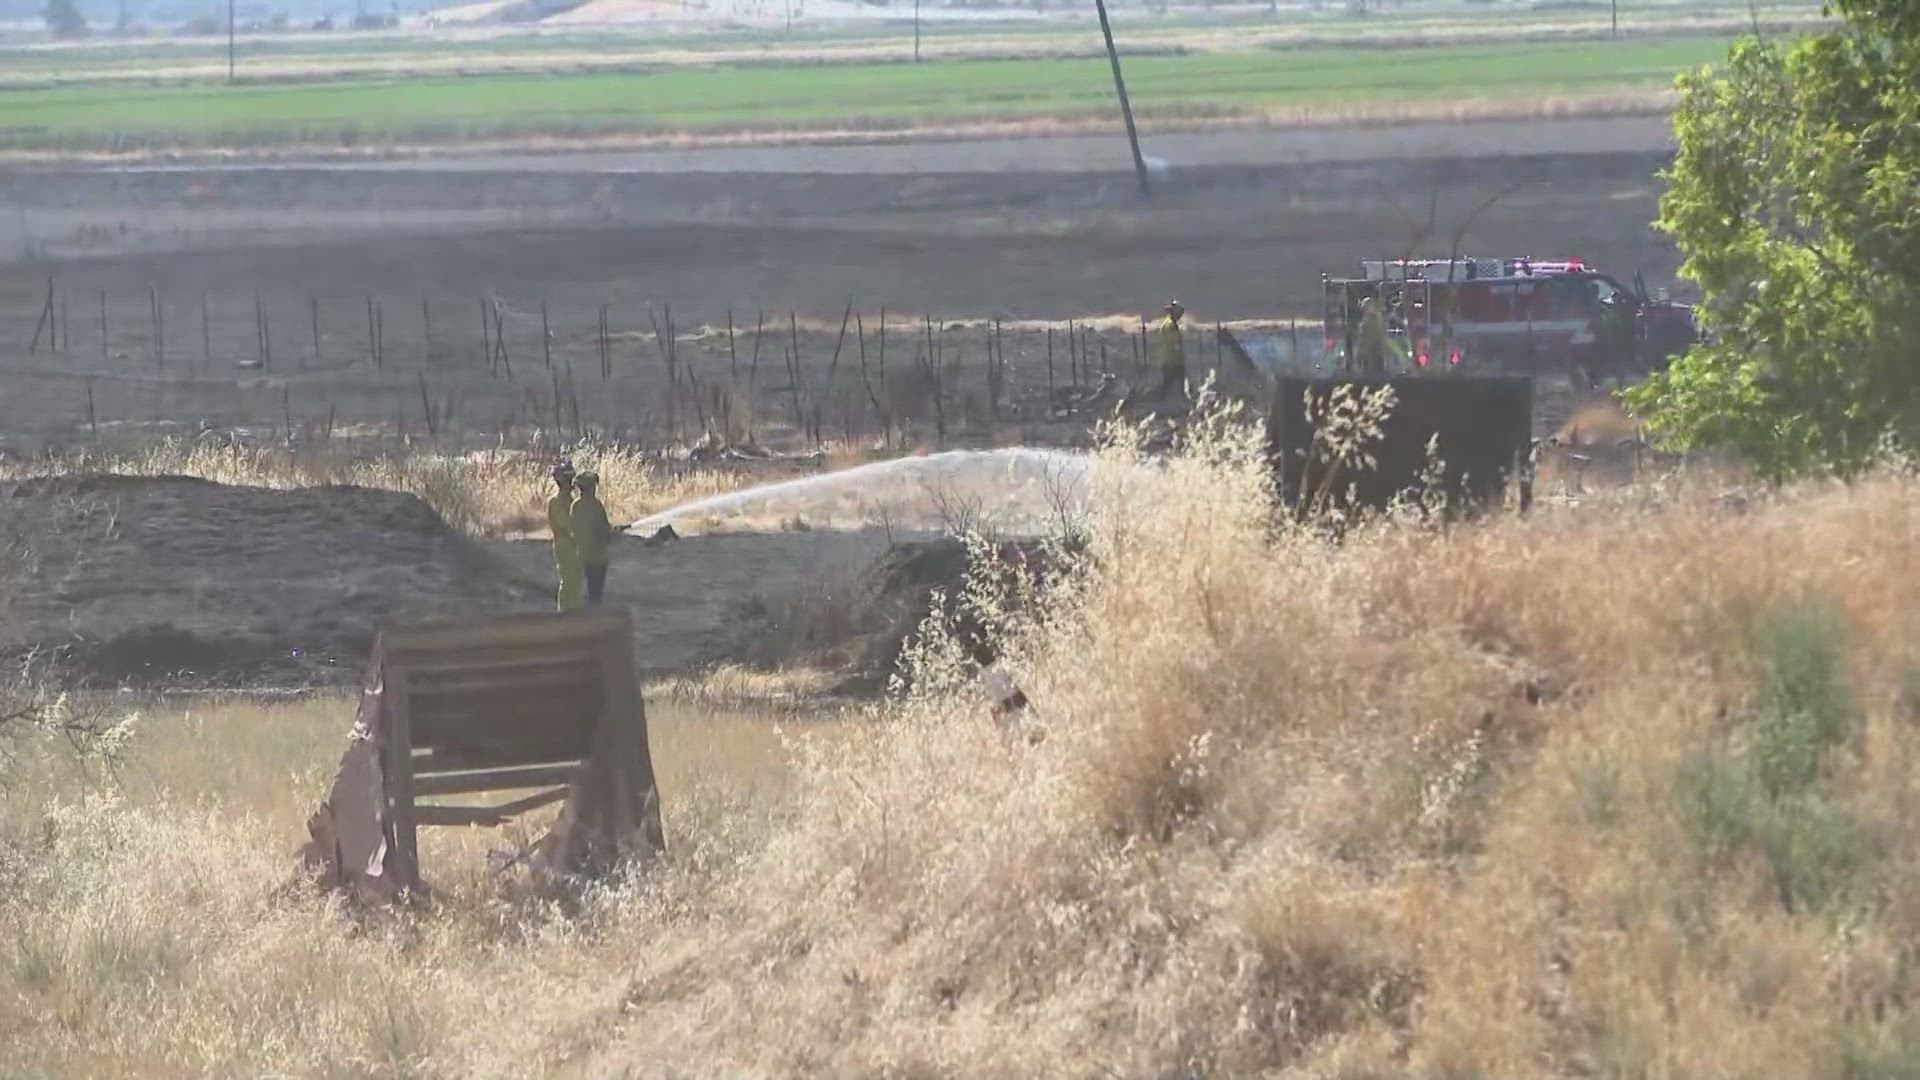 Rapid Spread of Grass Fire in Sacramento Threatens Homes